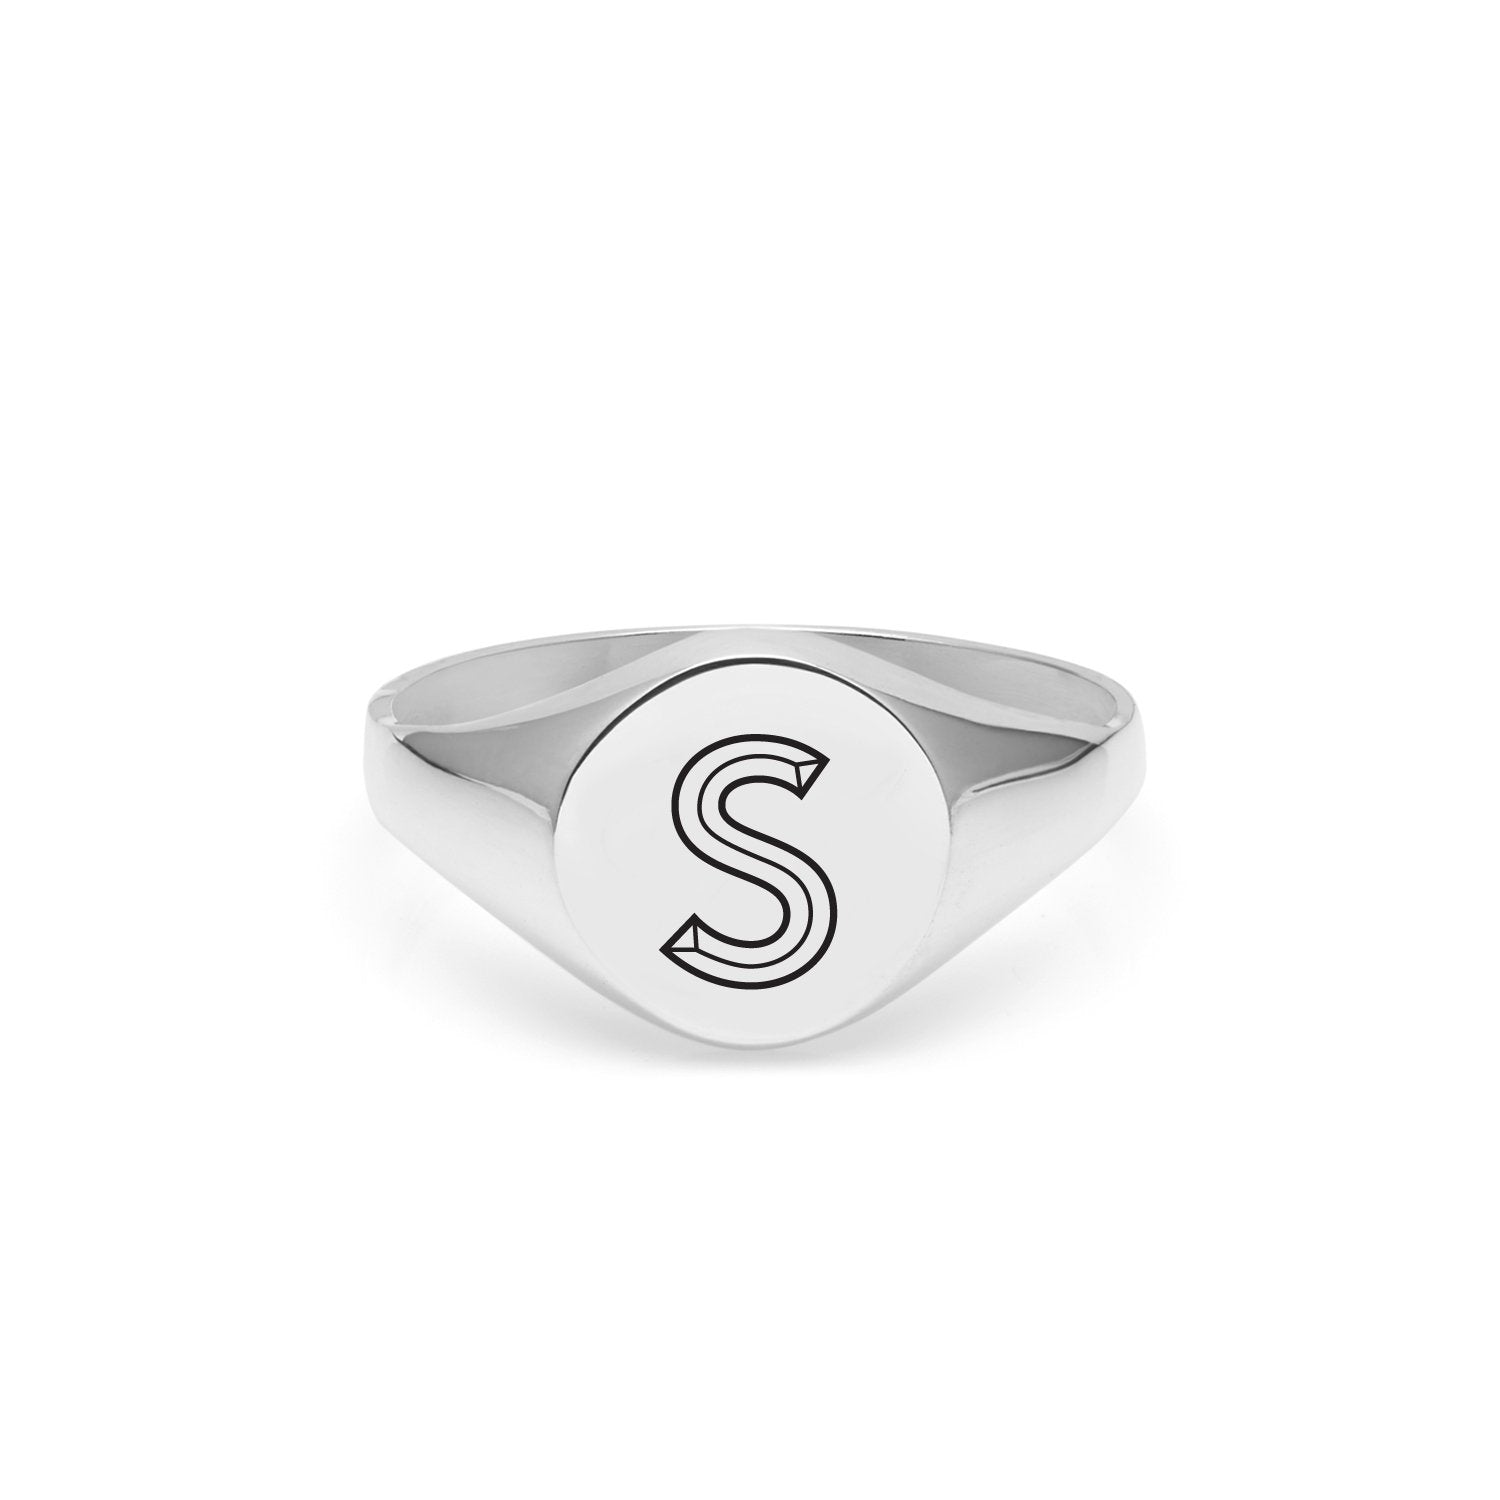 Facett Initial S Round Signet Ring - Silver - Myia Bonner Jewellery